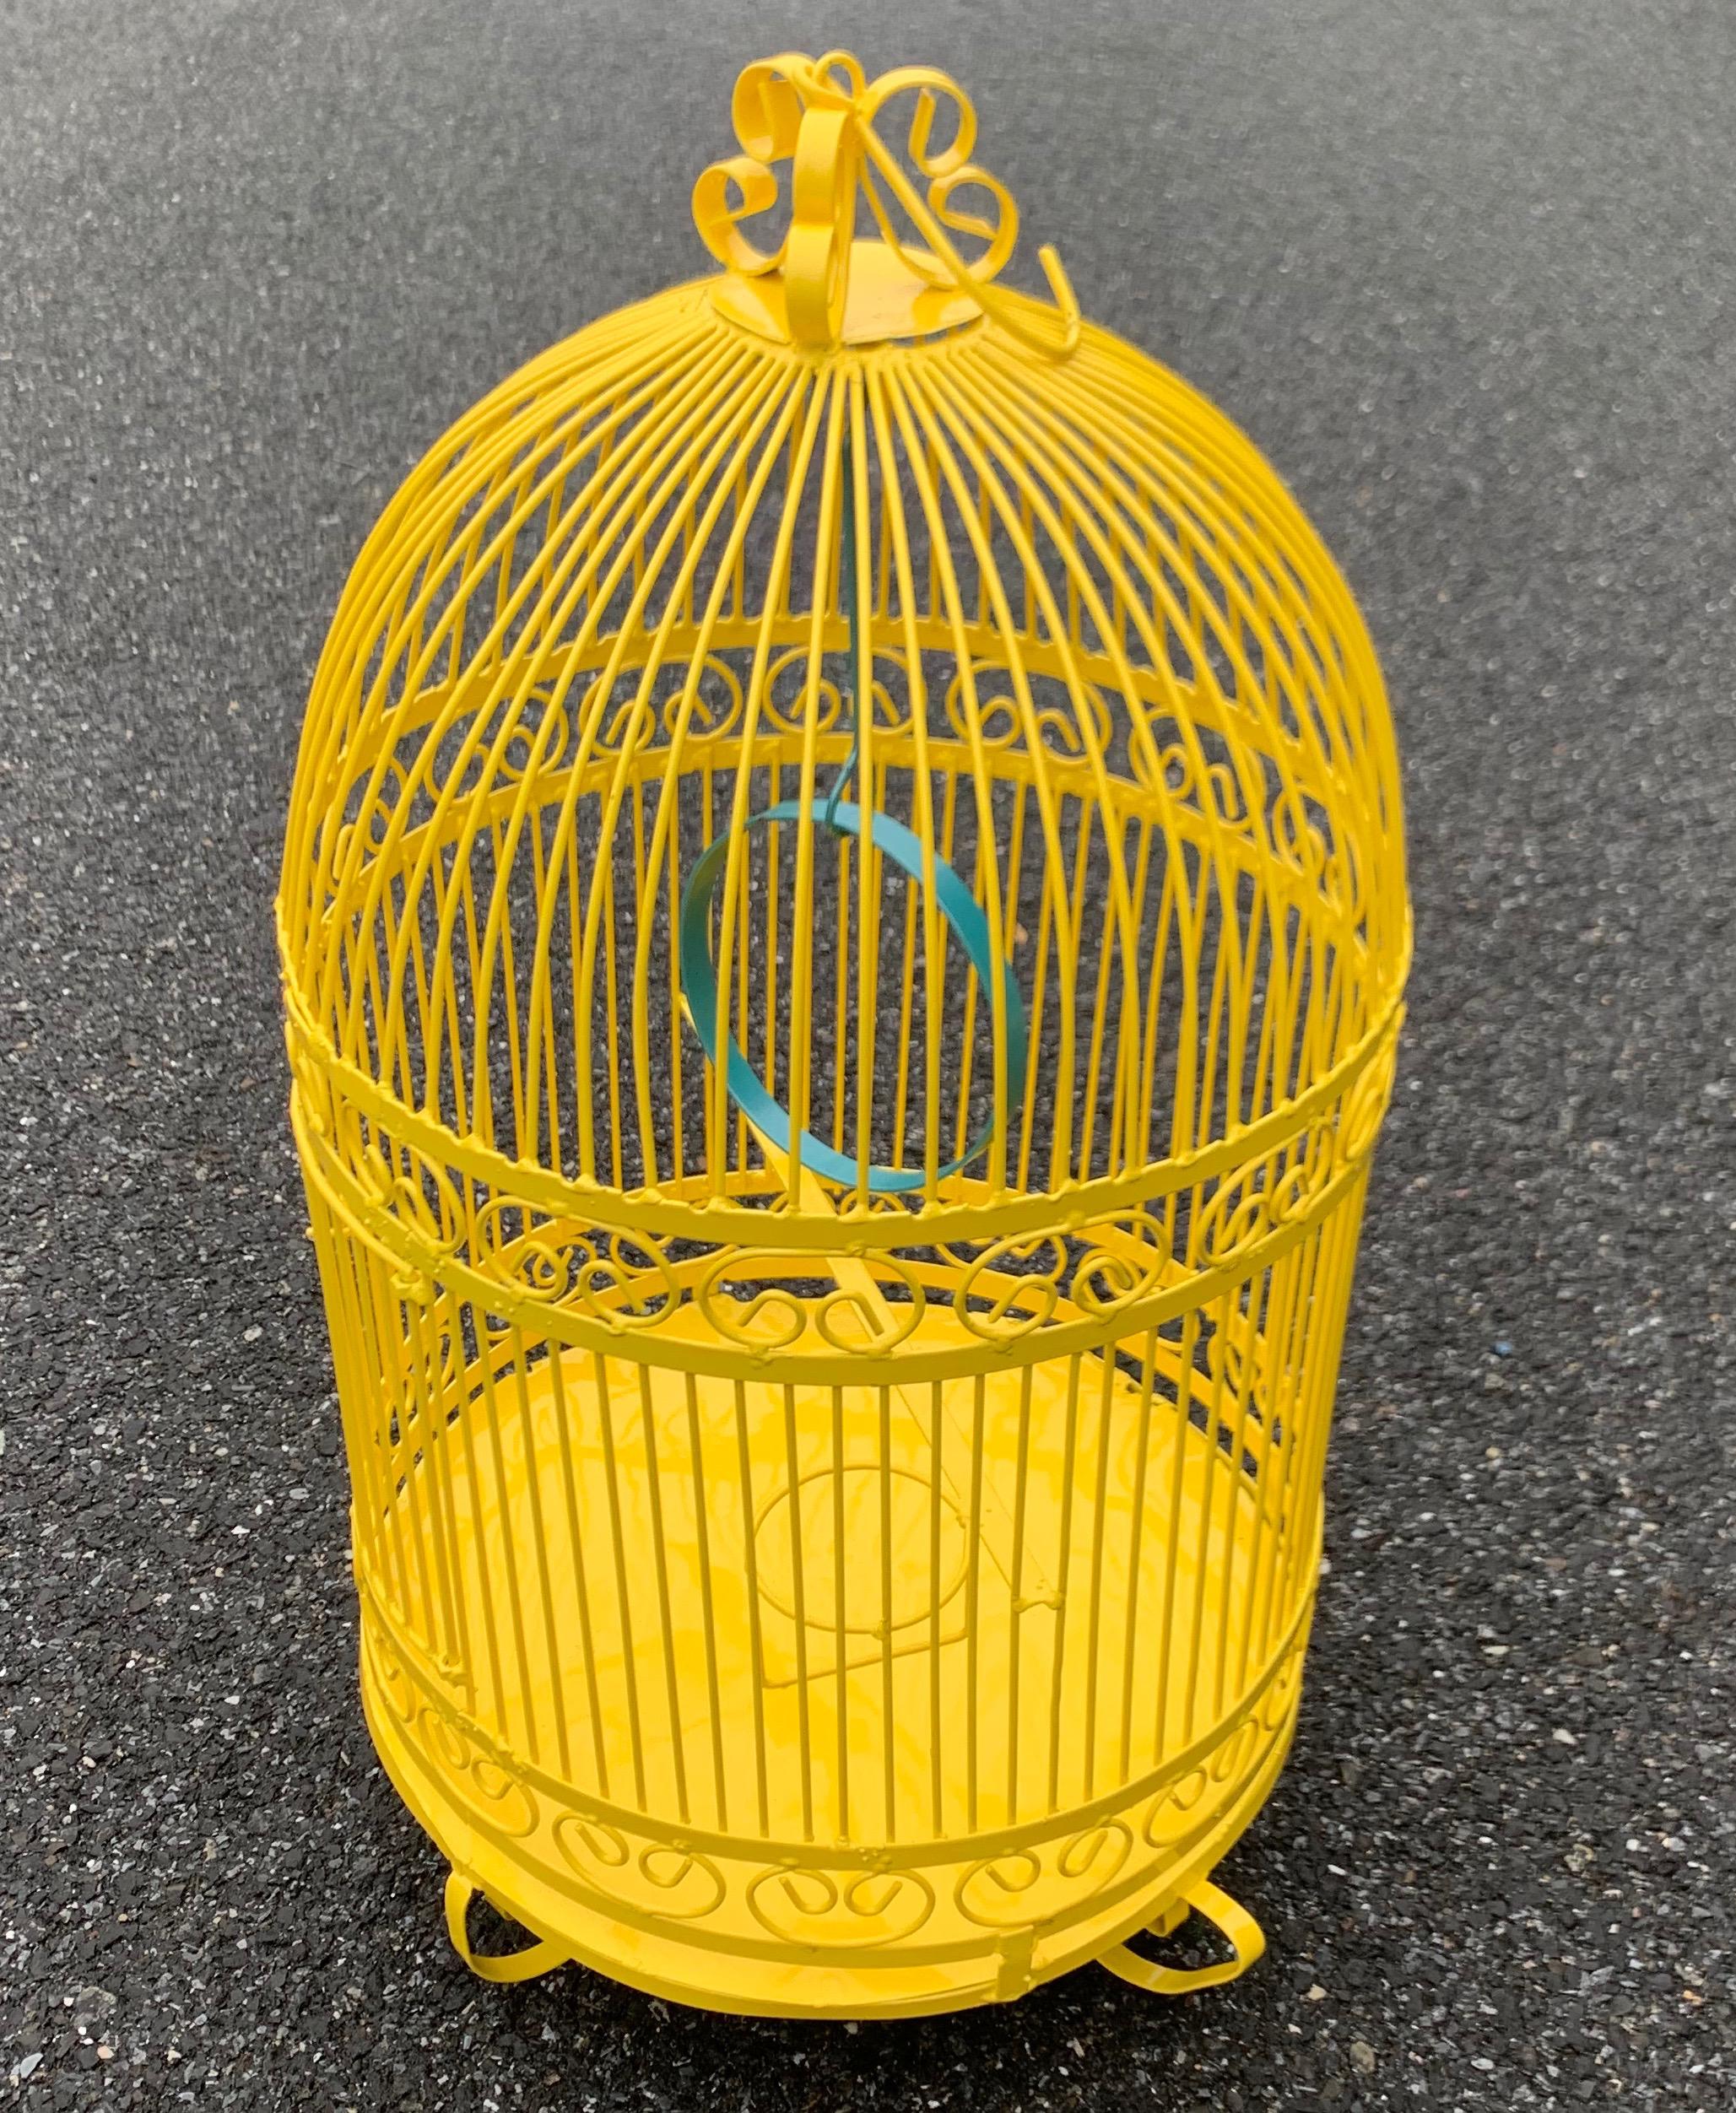 Vintage Metal Birdcage on Stand, Newly Powder-Coated in Bright Sunshine Yellow 4